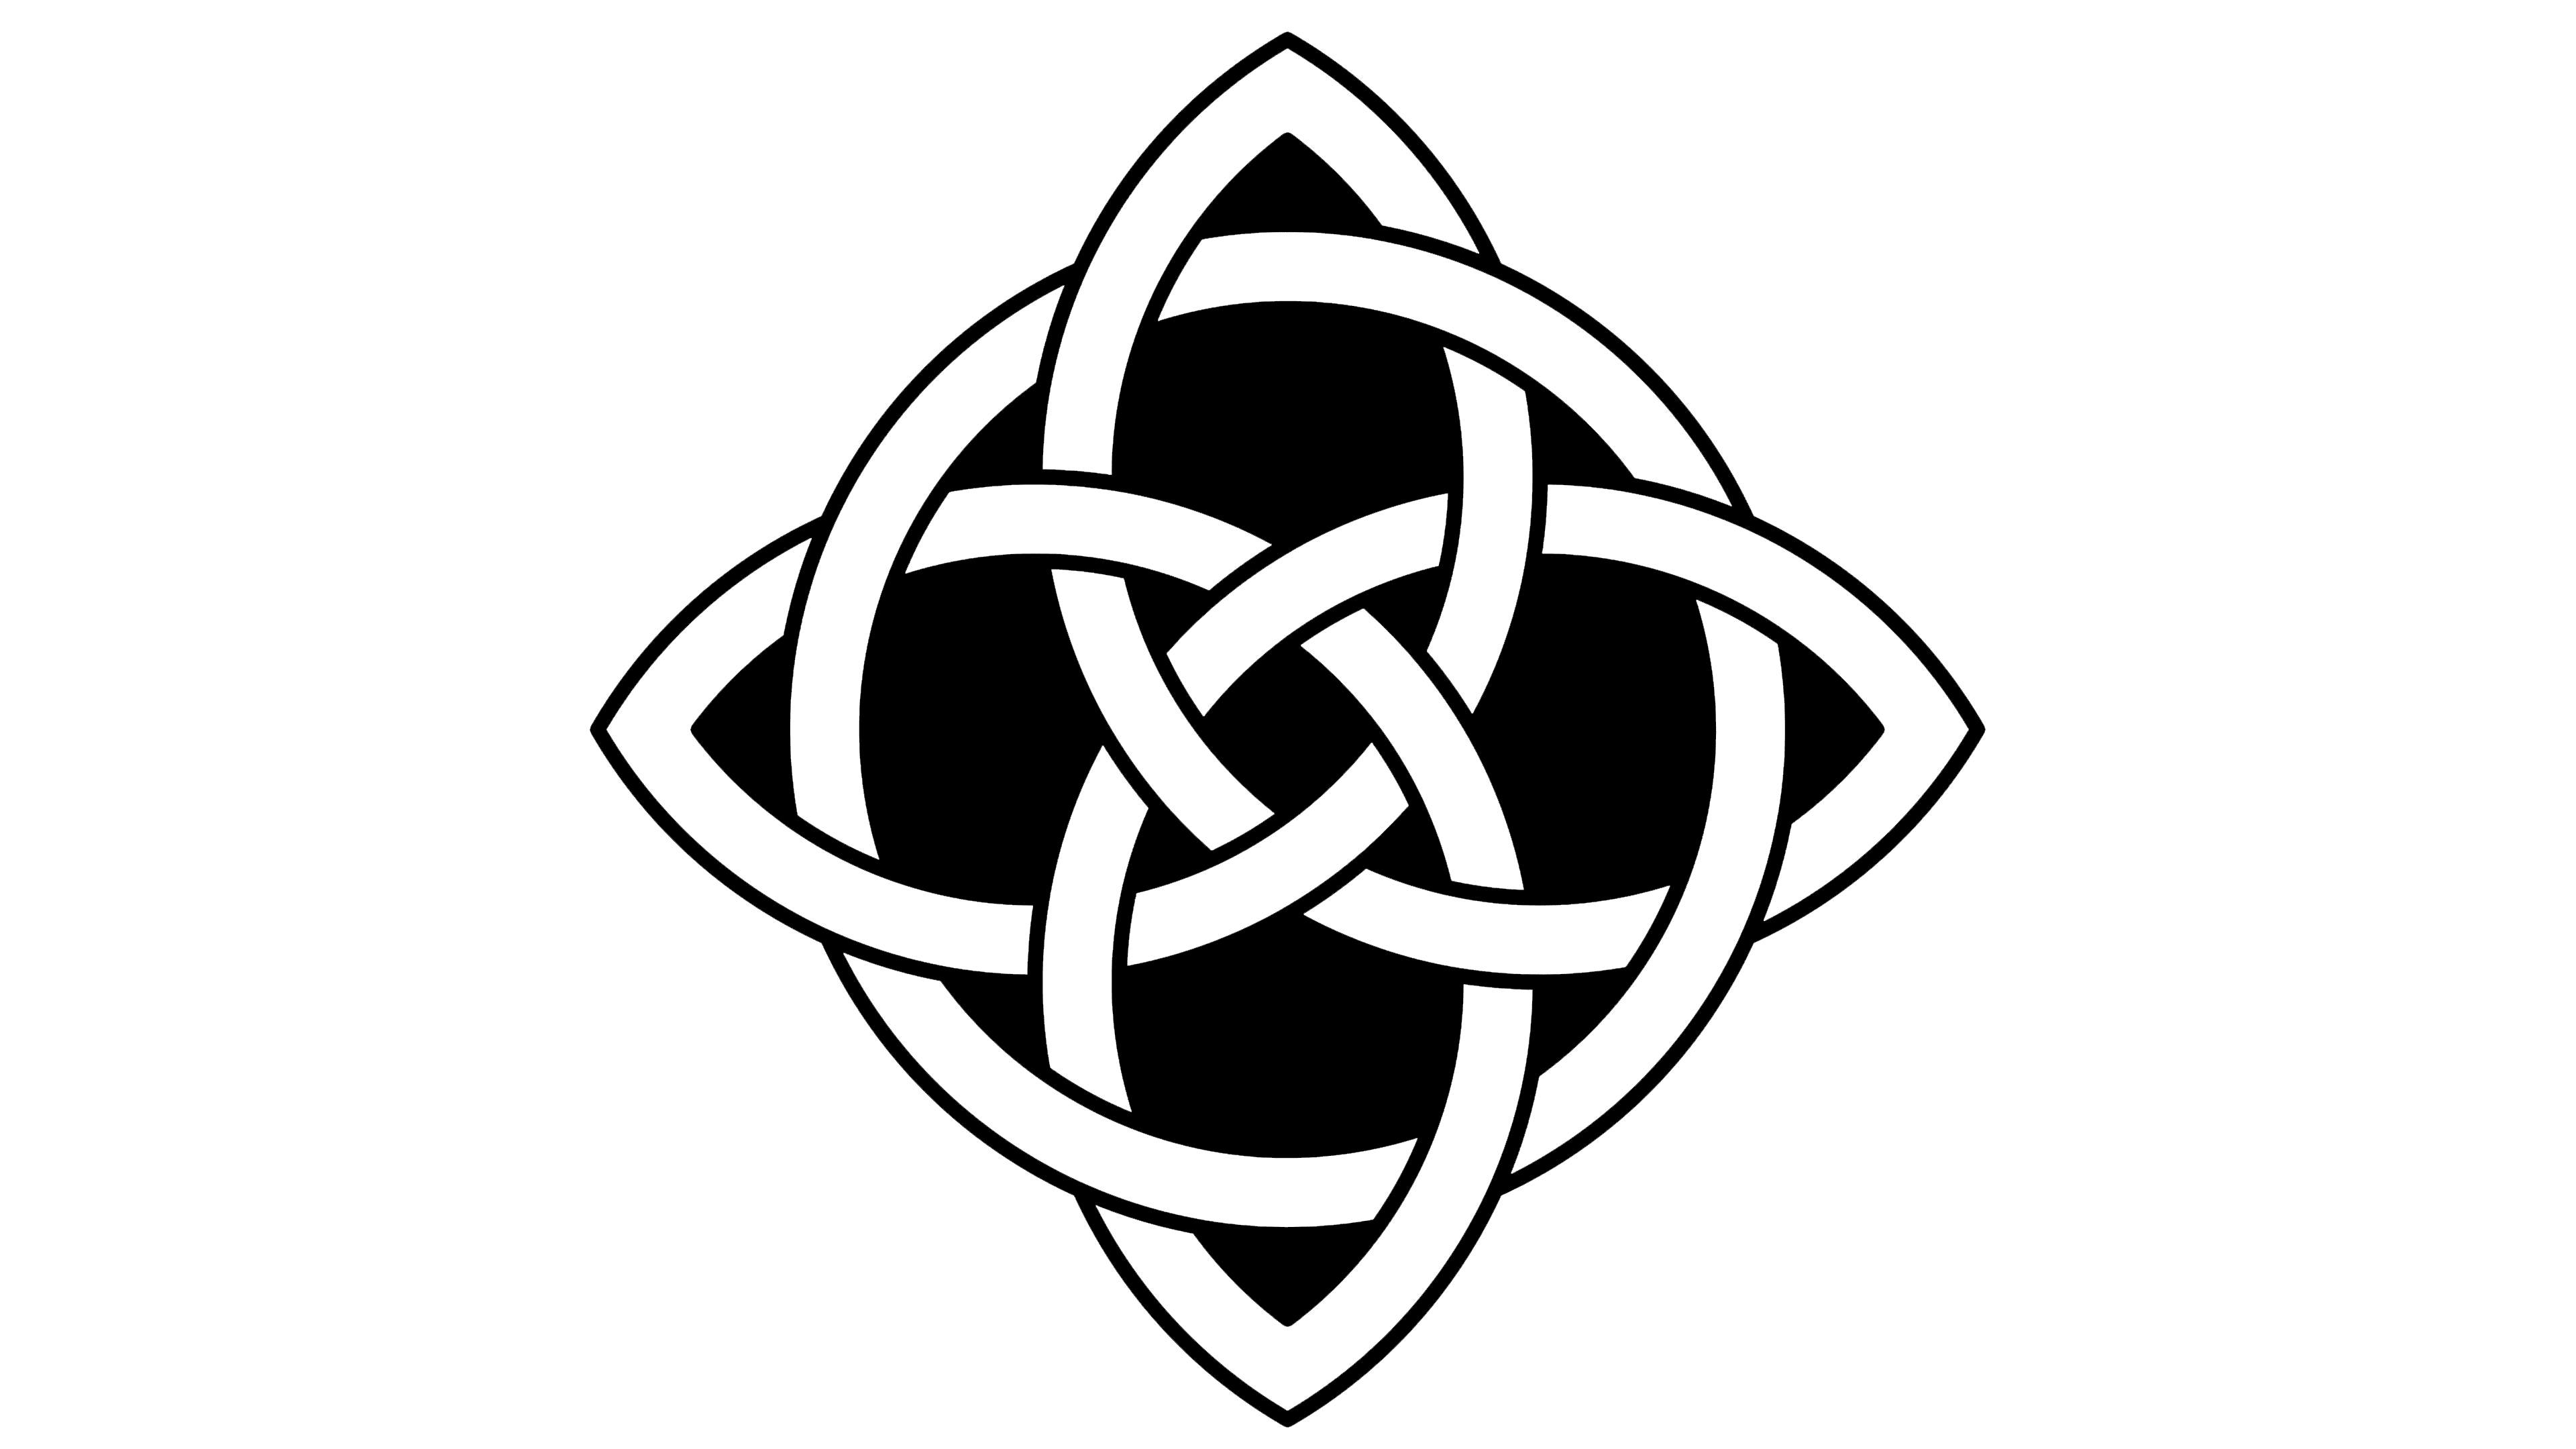 Top 30+ Celtic Symbols And Their Meanings (Updated monthly)